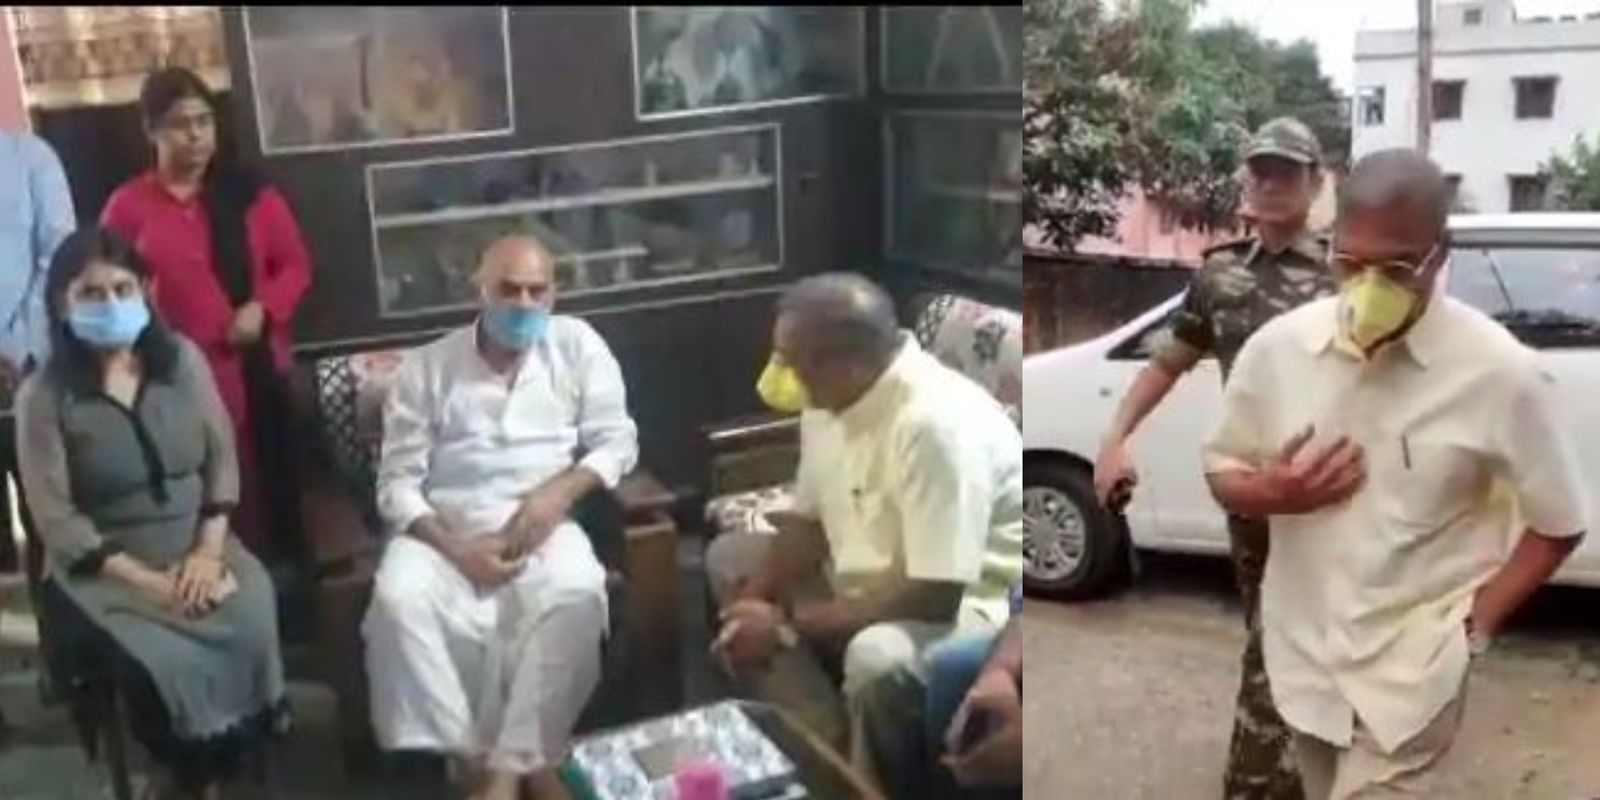 Nana Patekar Visits Late Actor Sushant Singh Rajput's Home In Patna To Offer His Condolences To The Family